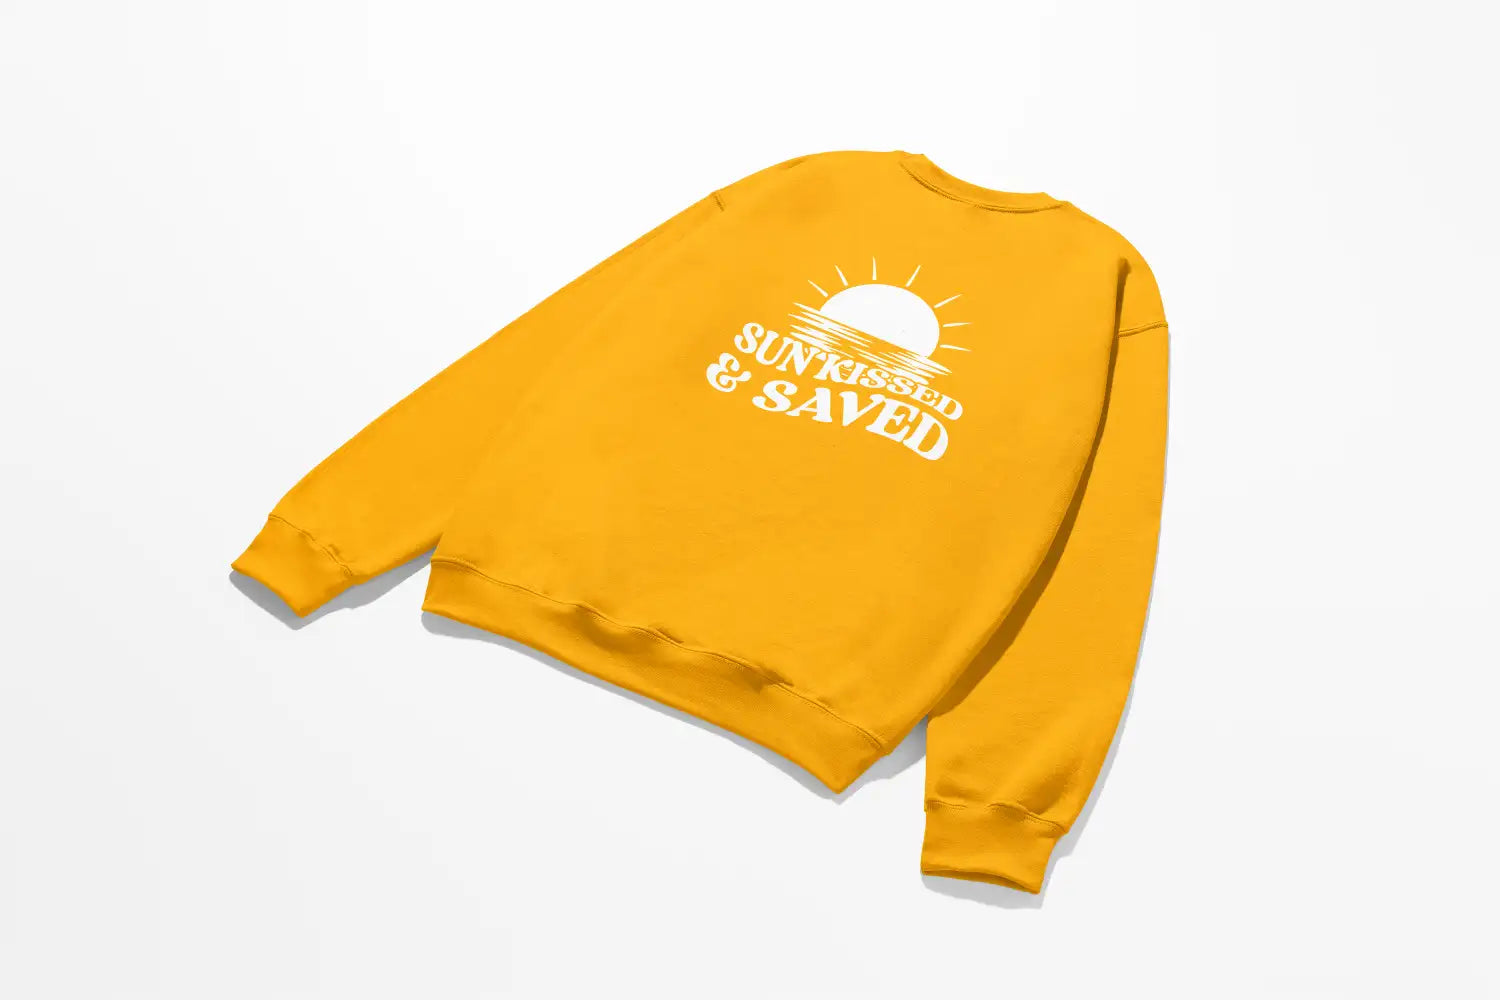 A yellow Sunkissed & Saved Sweatshirt by Be Still and Know, with a sun on it, radiating sun rays.